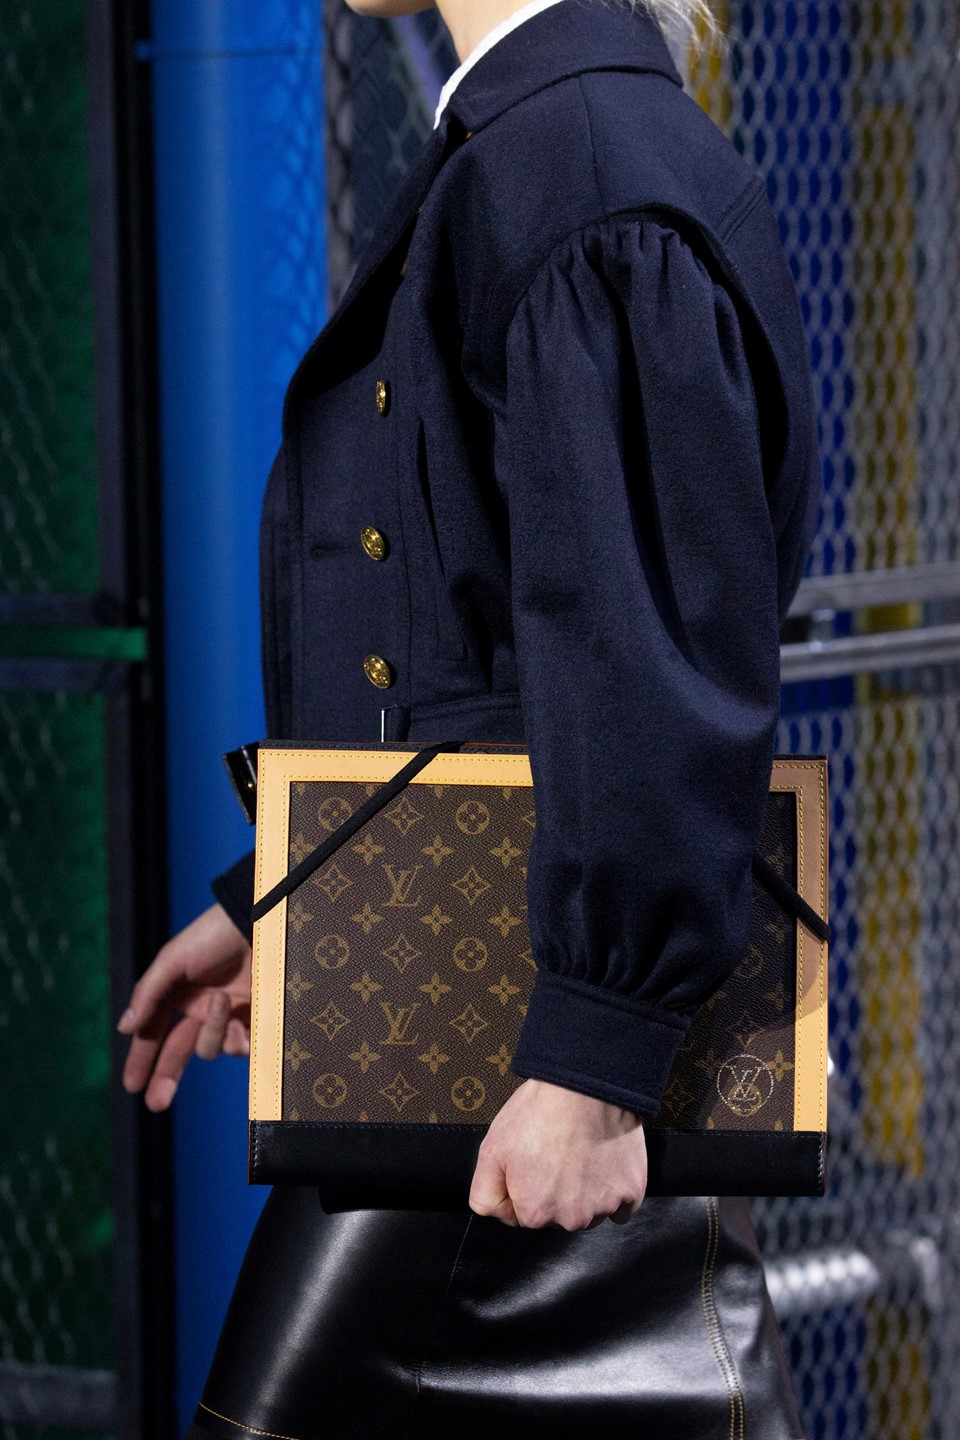 A Guide to the Codes of Ghesquière's Vuitton